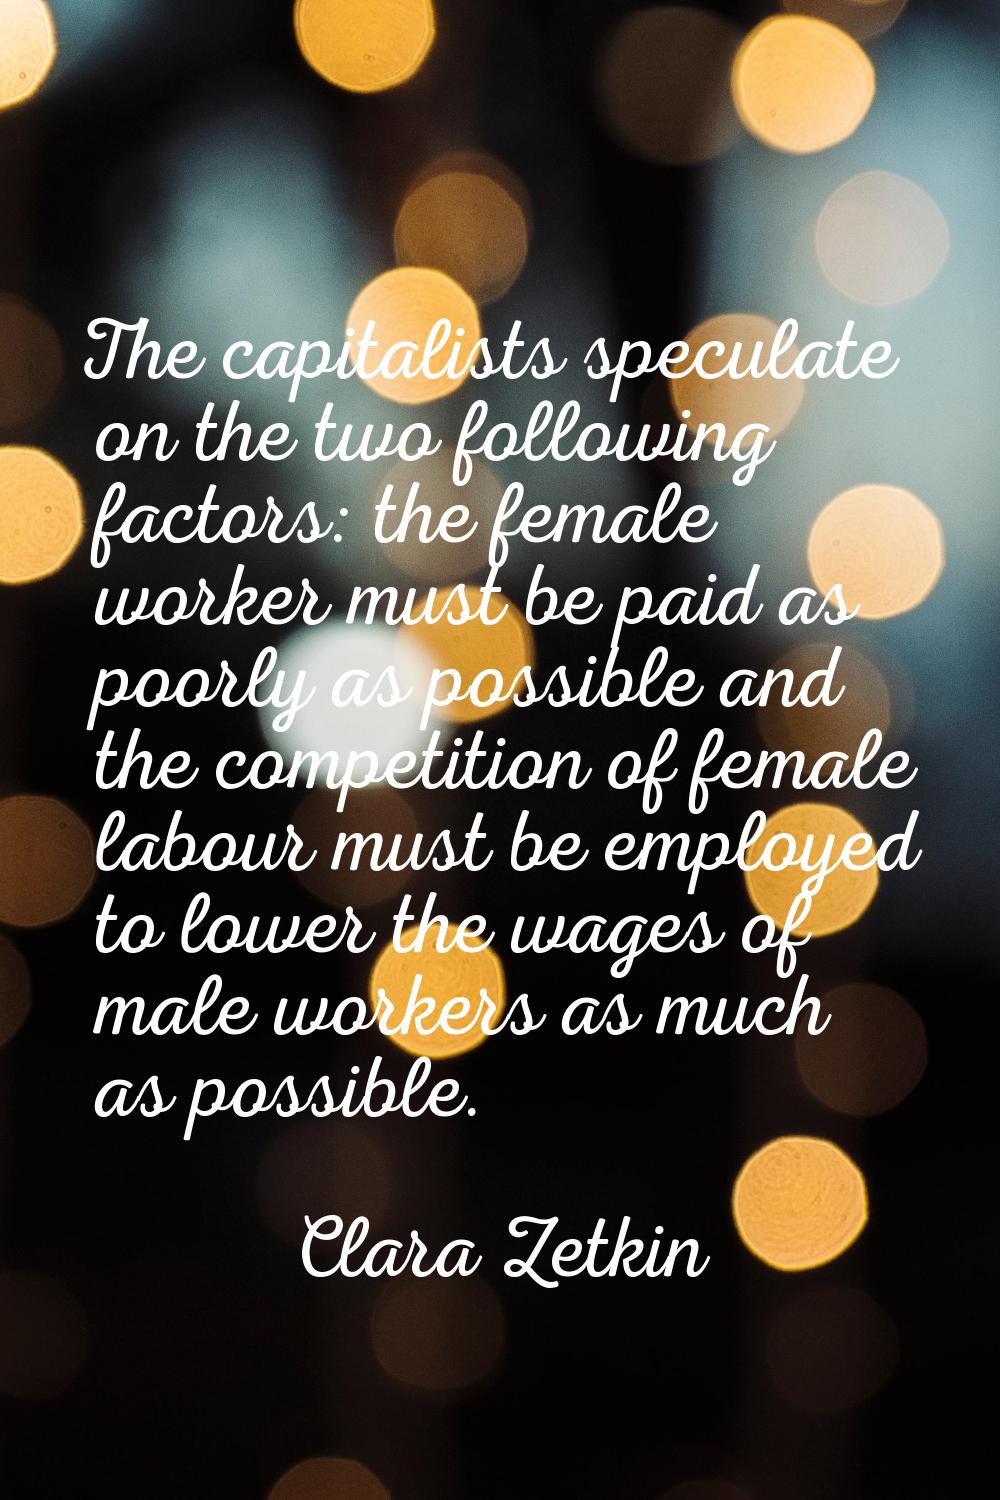 The capitalists speculate on the two following factors: the female worker must be paid as poorly as